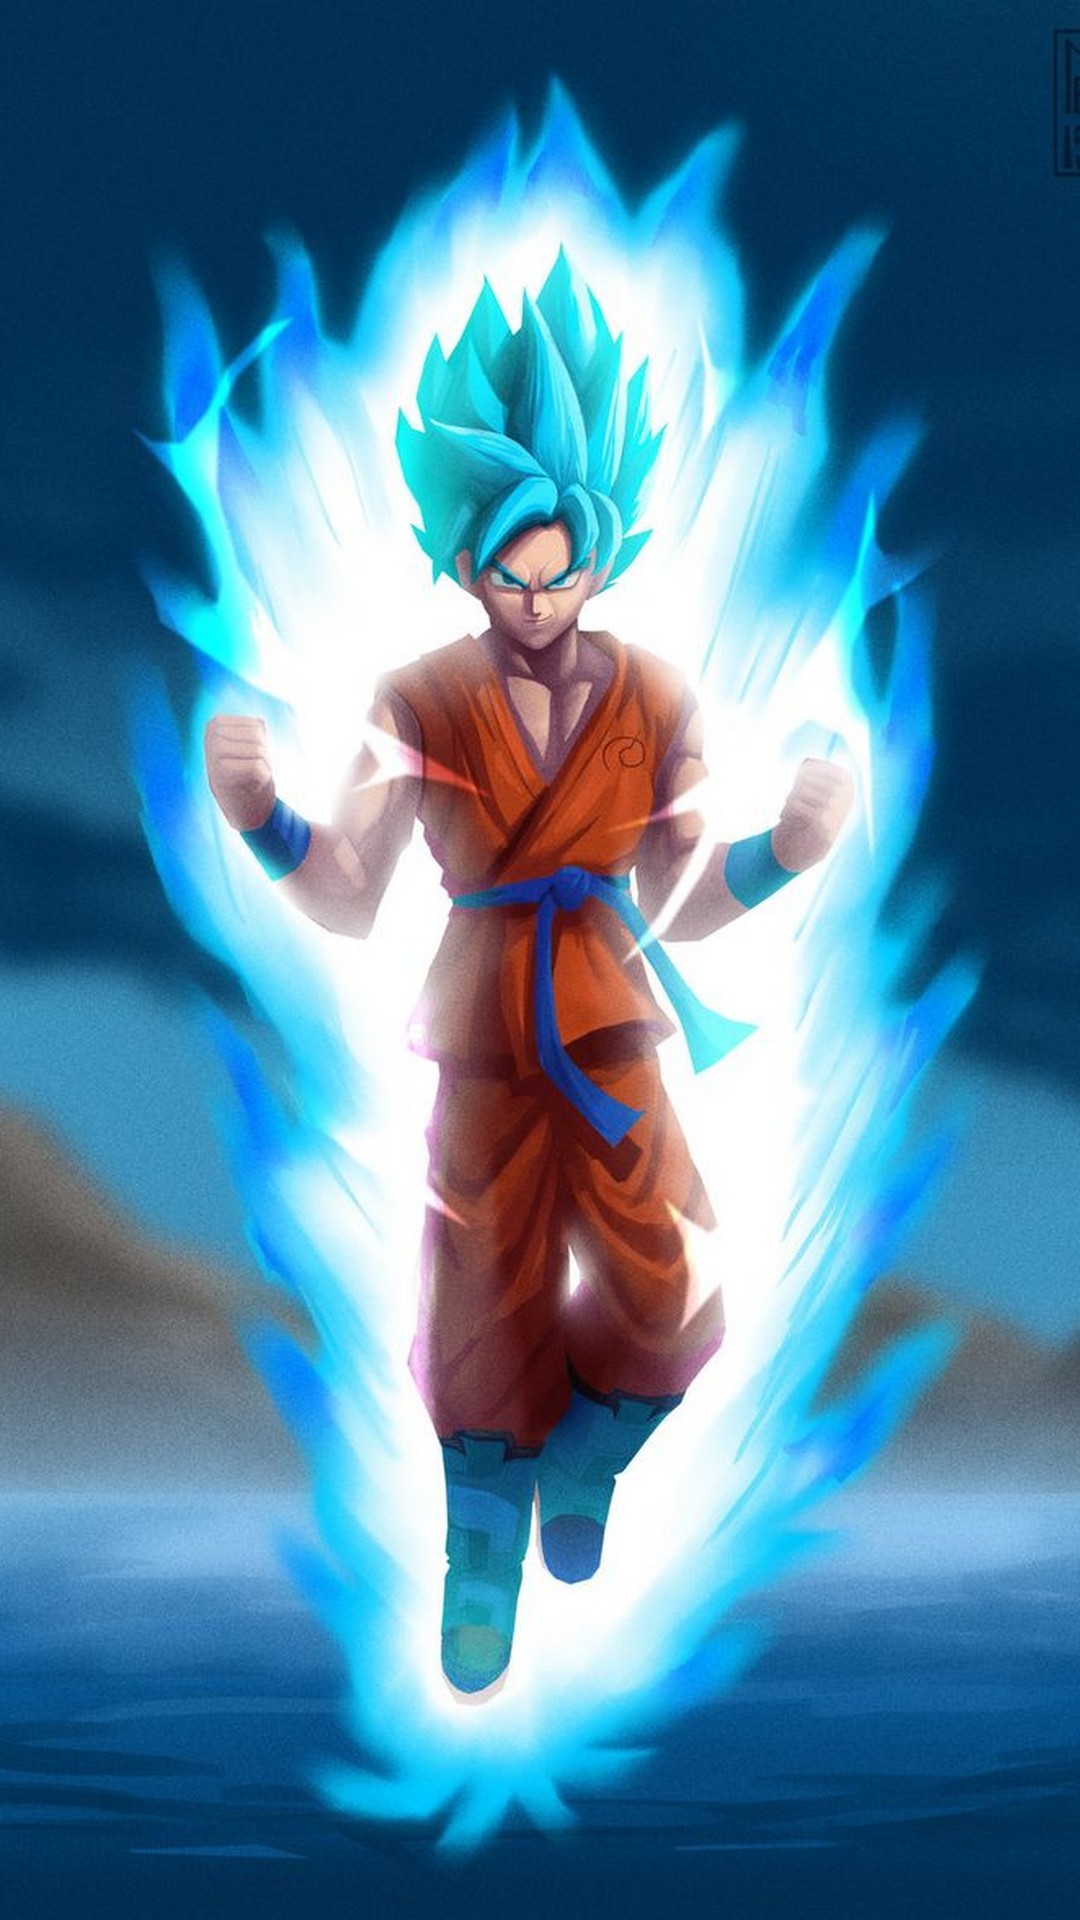 Goku SSJ Blue iPhone Wallpaper with resolution 1080X1920 pixel. You can make this wallpaper for your iPhone 5, 6, 7, 8, X backgrounds, Mobile Screensaver, or iPad Lock Screen